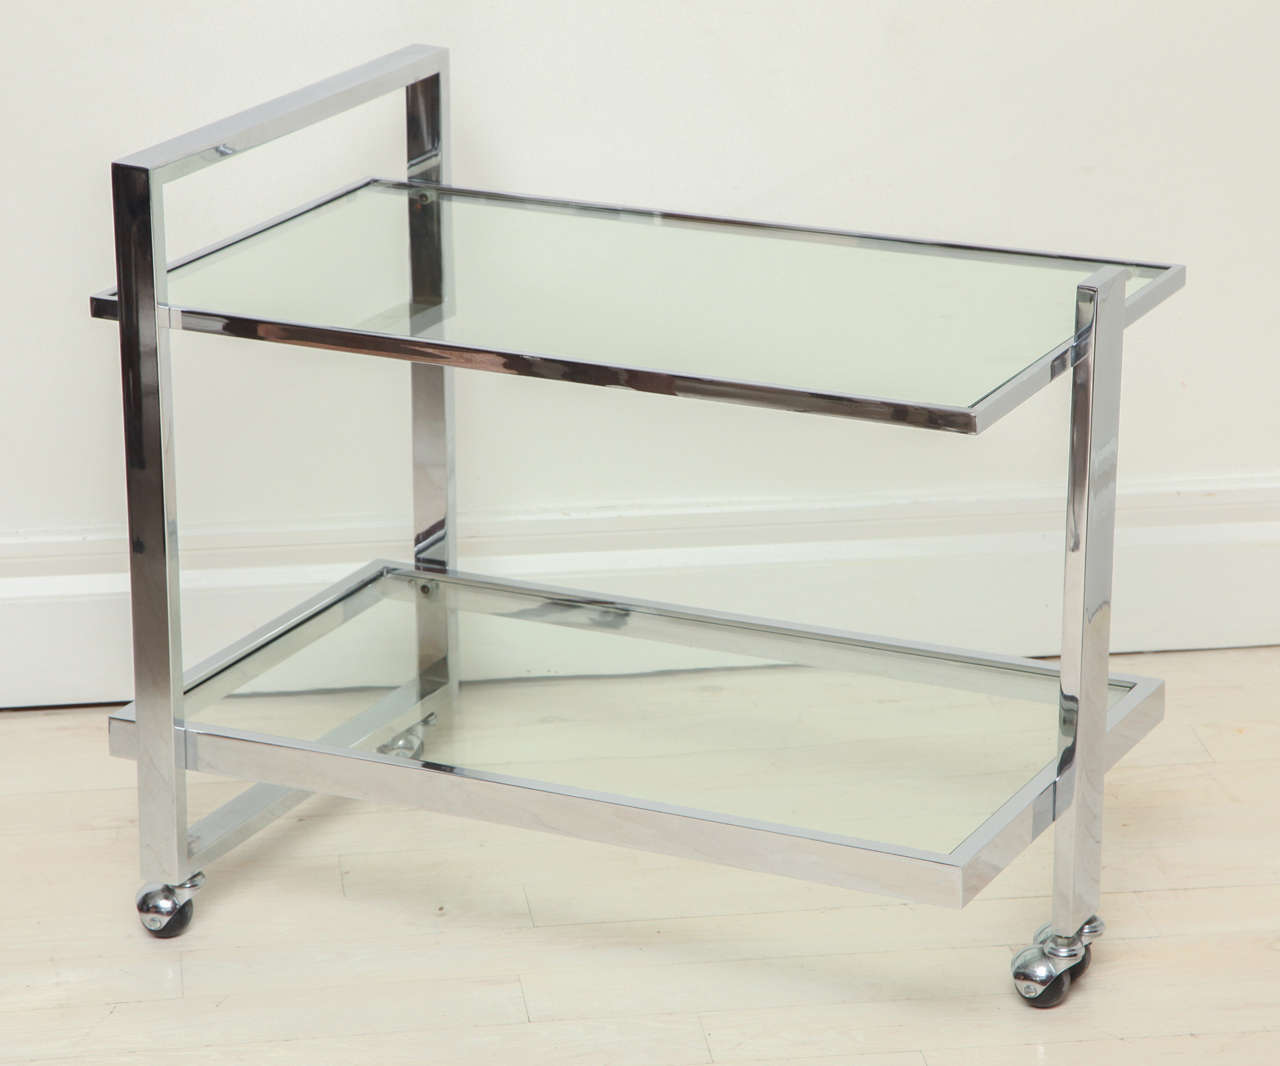 Chrome and glass two-tiered bar cart on ball casters